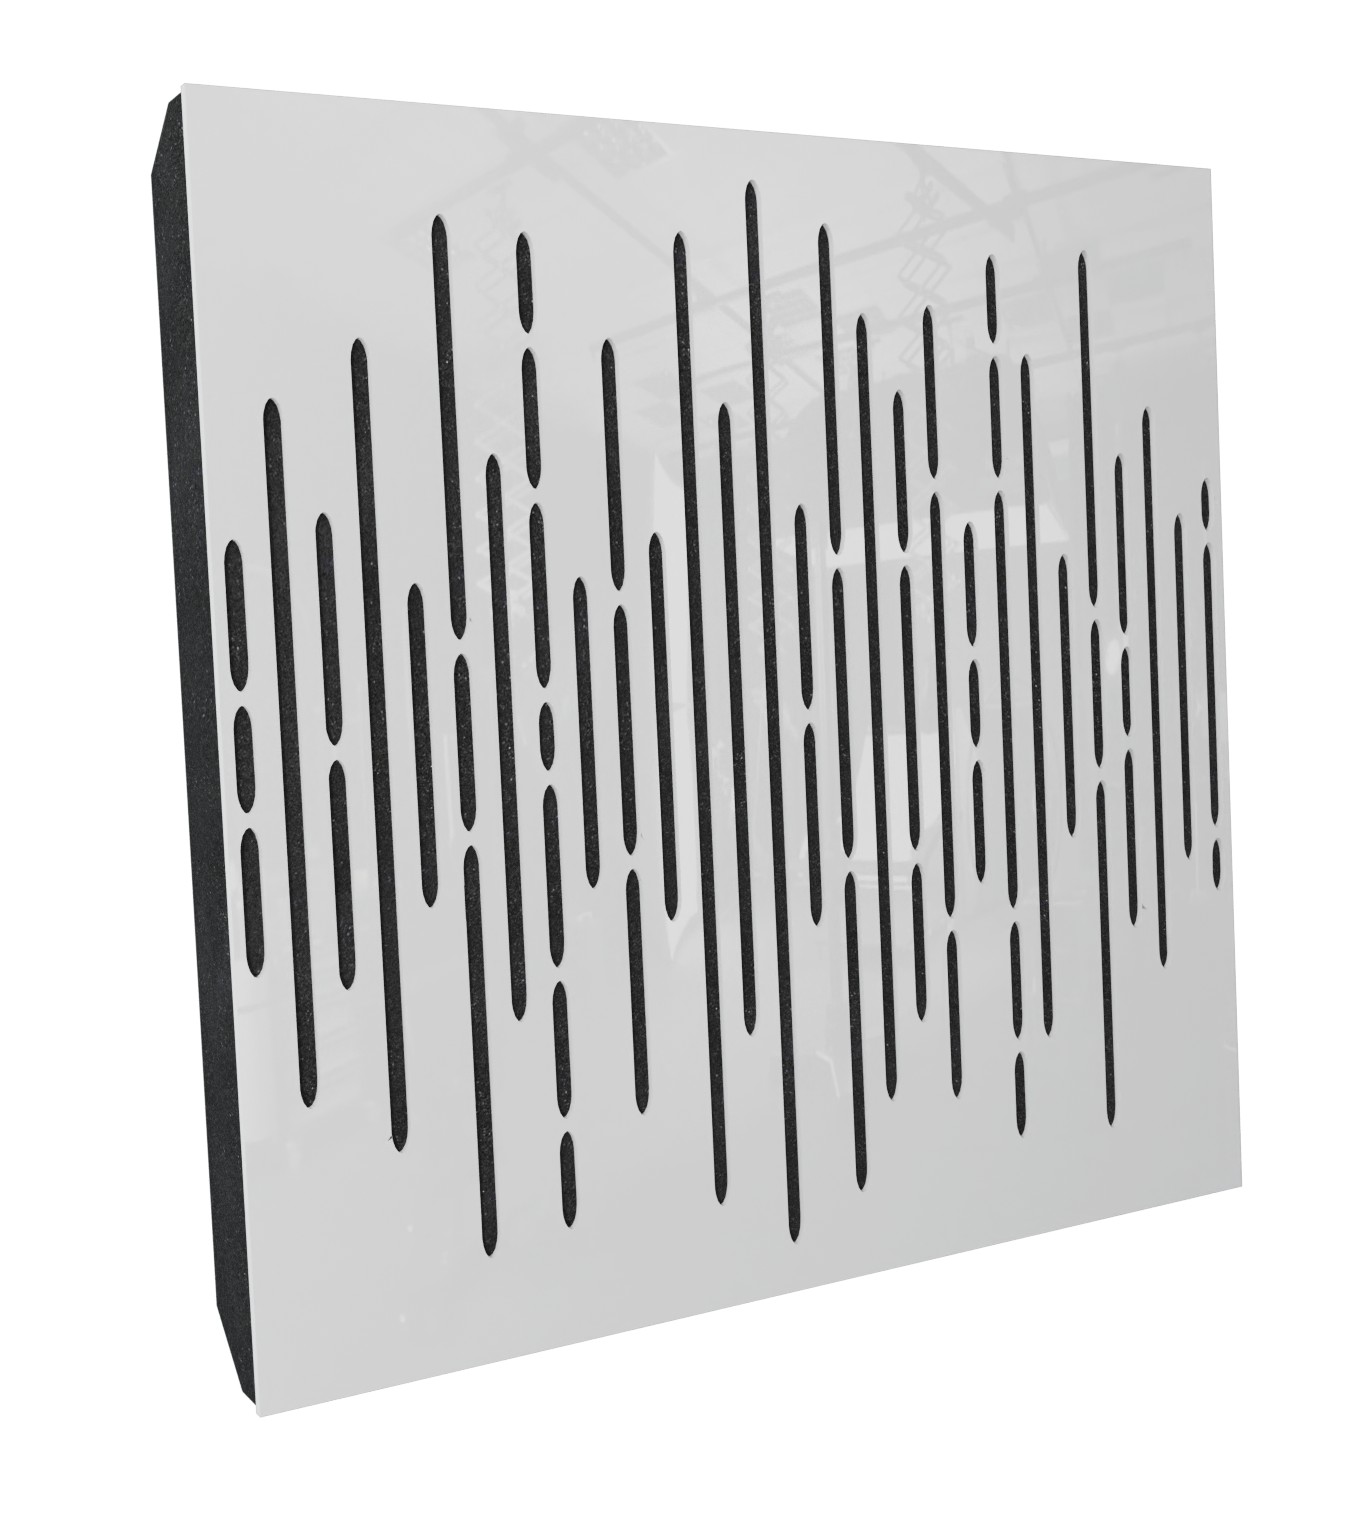 Sound-absorpbing acoustic panel WAVE white gloss with a thikness of 30 mm by UA Acoustics